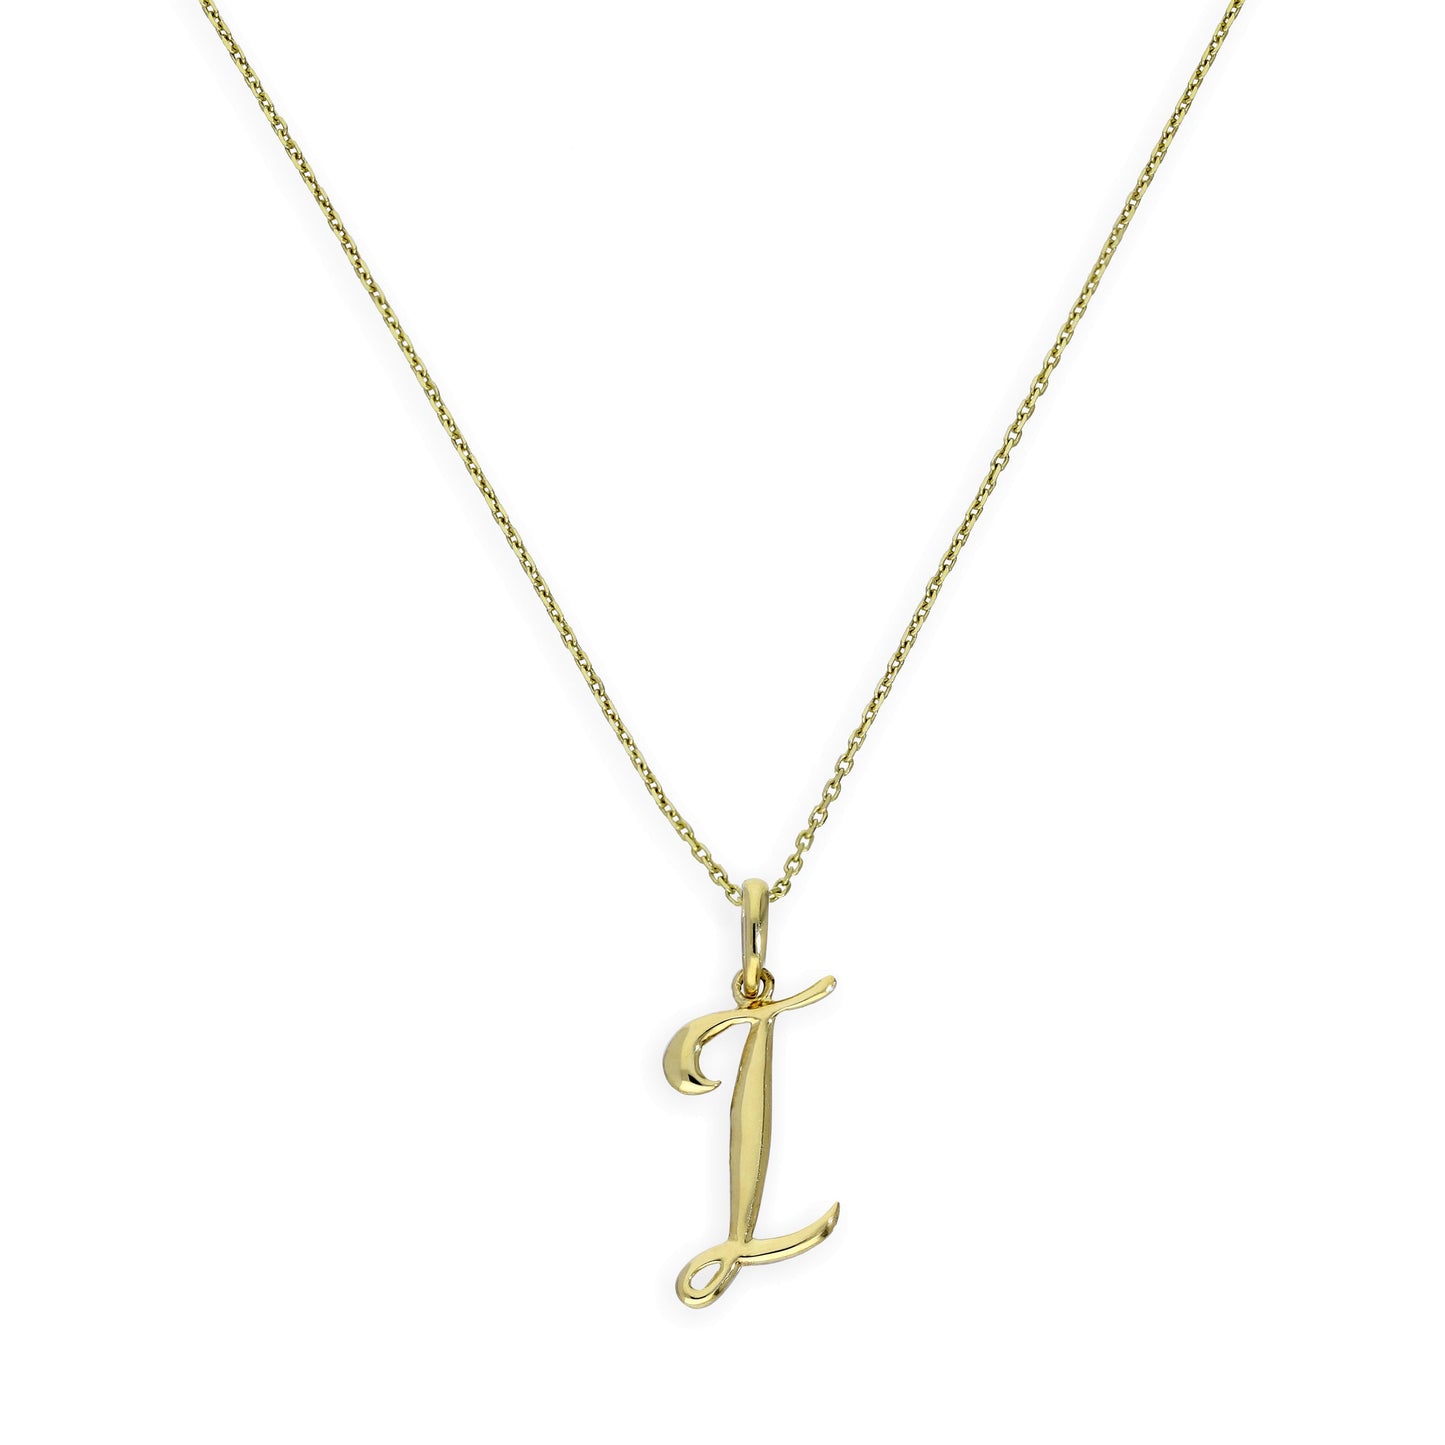 9ct Gold Fancy Calligraphy Script Letter I Pendant Necklace 16 - 20 Inches